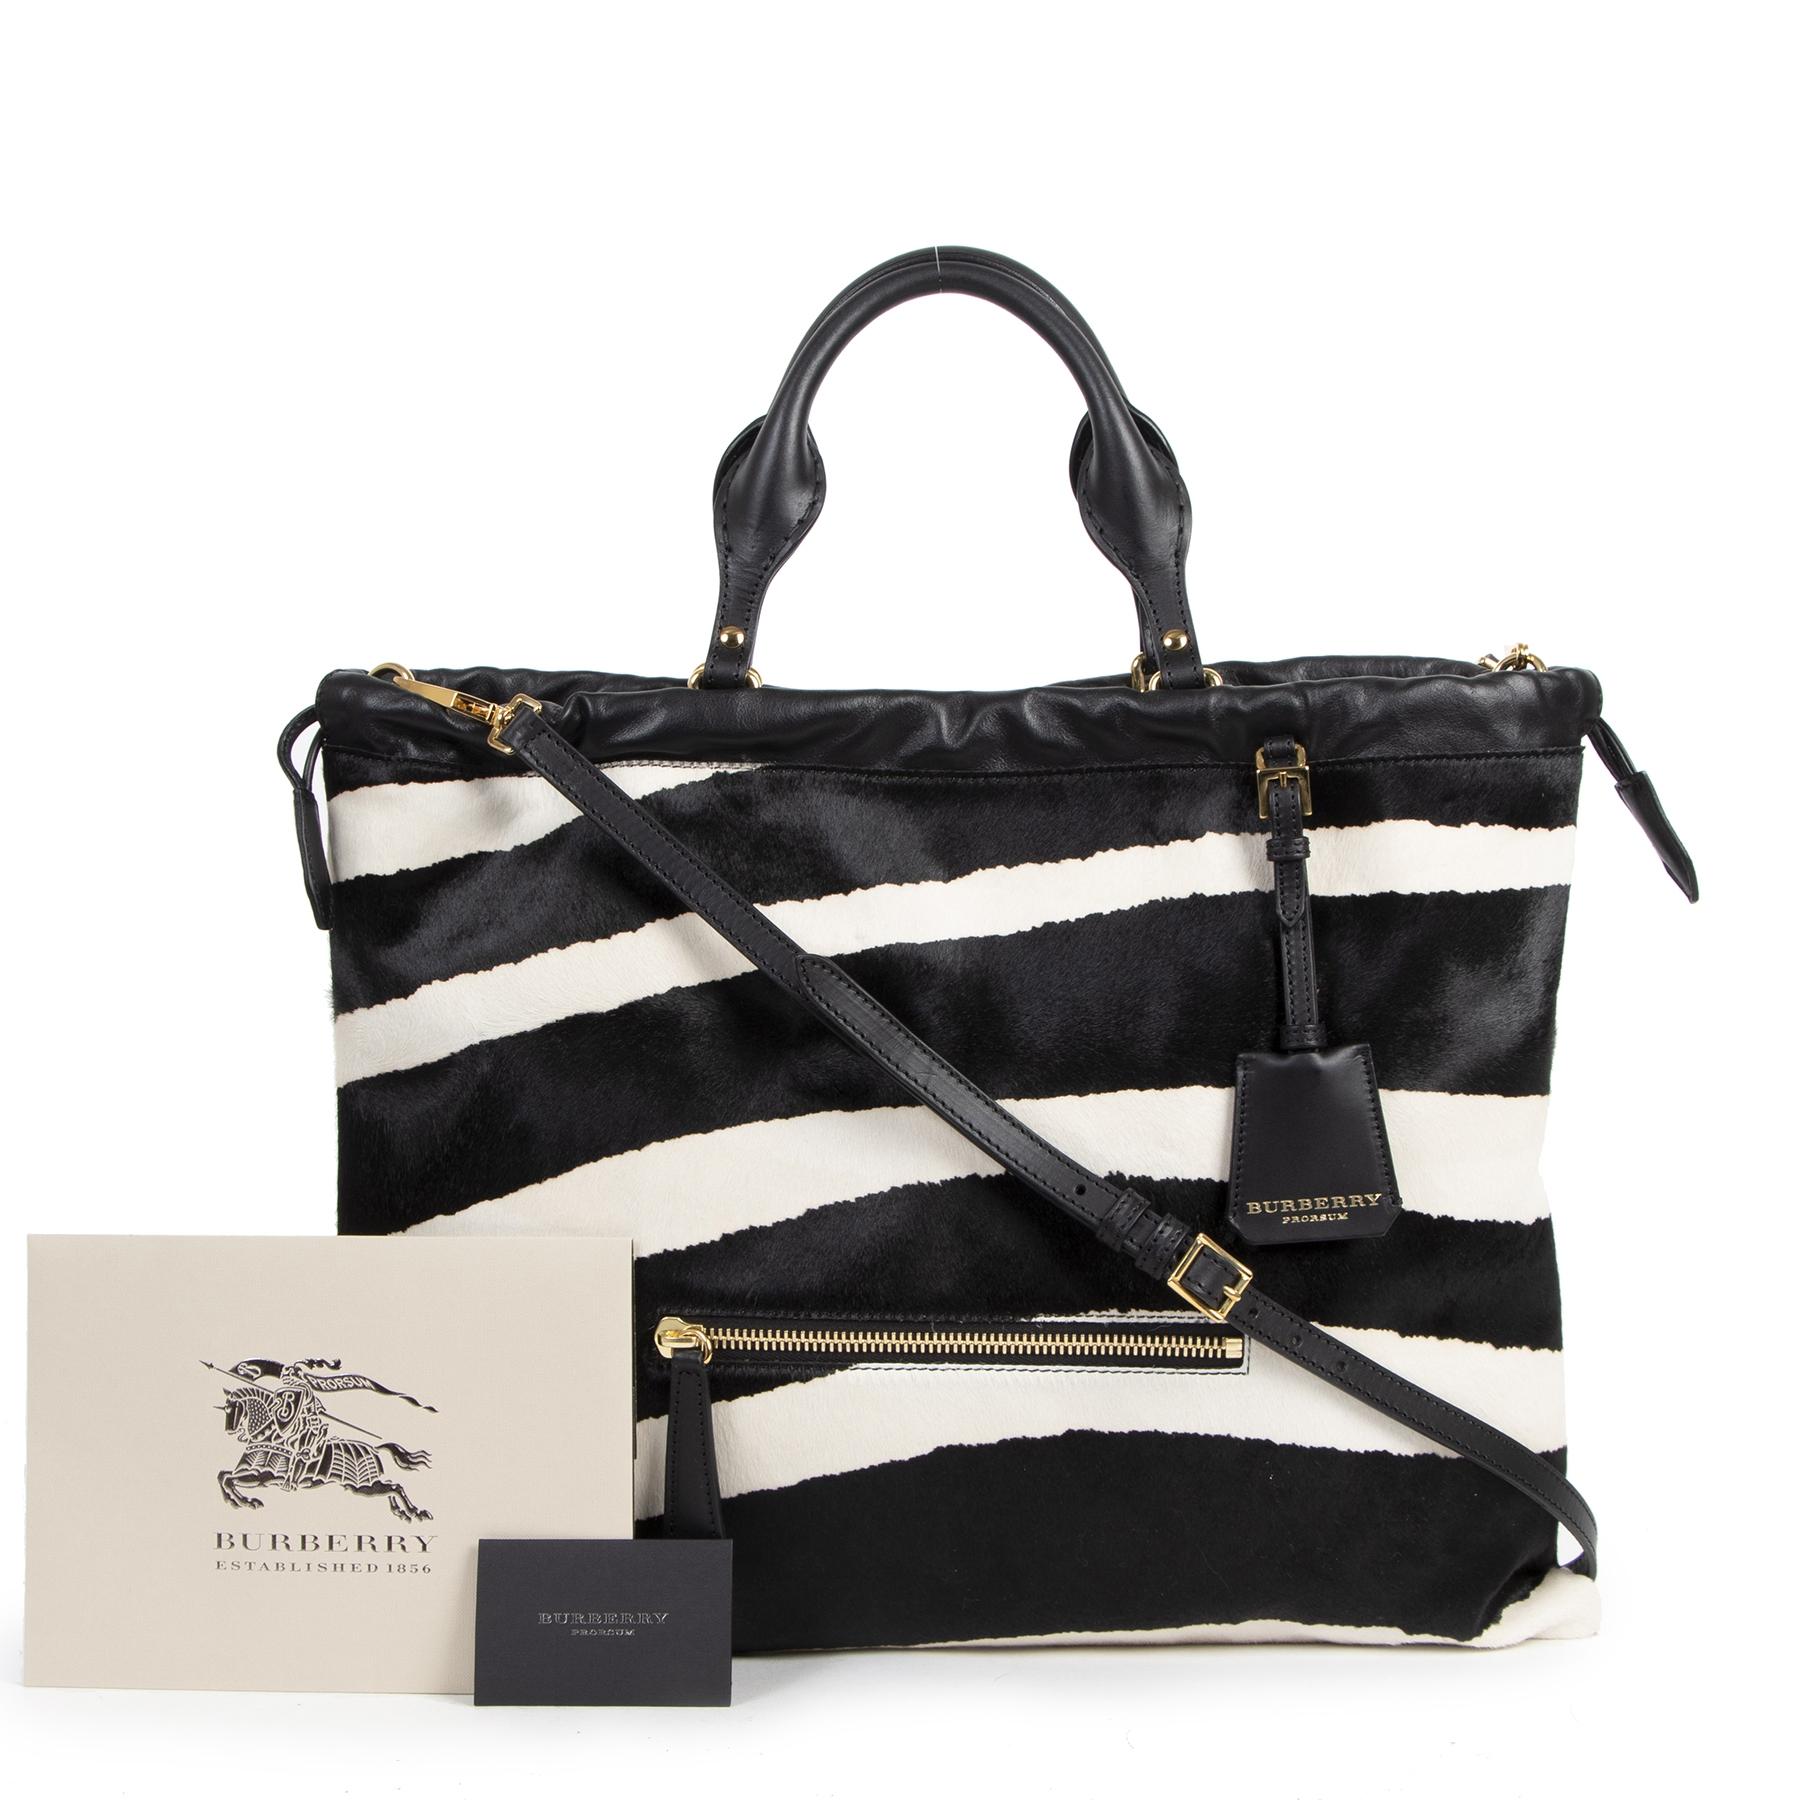 Very good preloved condition.

Burberry Zebra The Crush Bag

Stand out with this excentric zebra striped bag by Burberry. Its exterior is crafted out of calfhair which makes the bag soft to the touch. It features black leather handles, details and